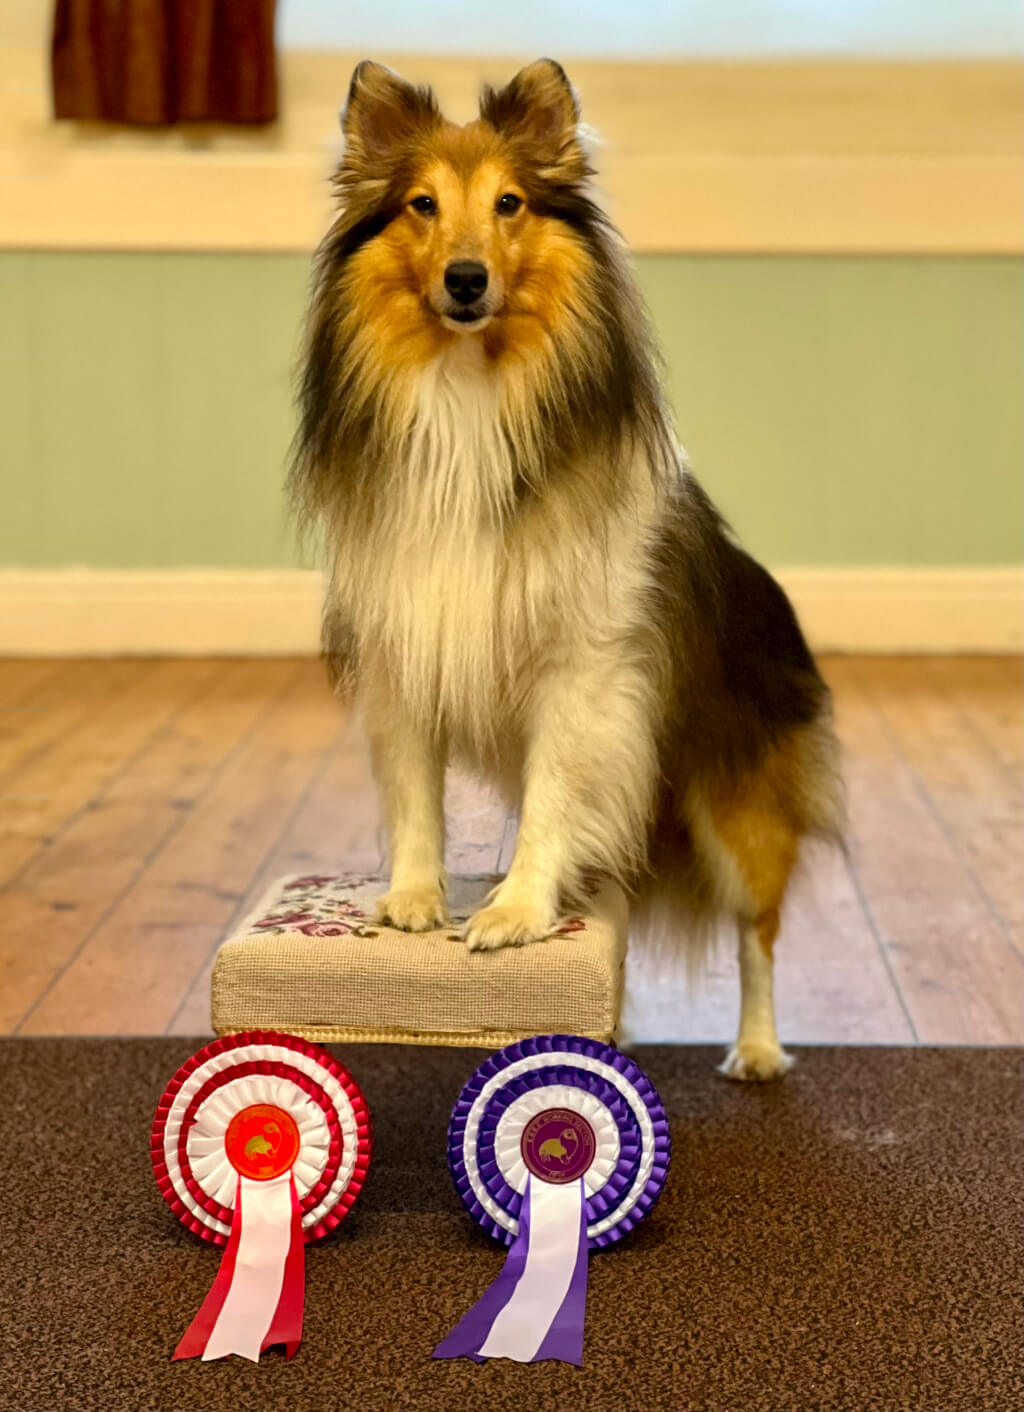 The Shetland Sheepdog Zorro standing with his front paws on a stool behind two rosettes